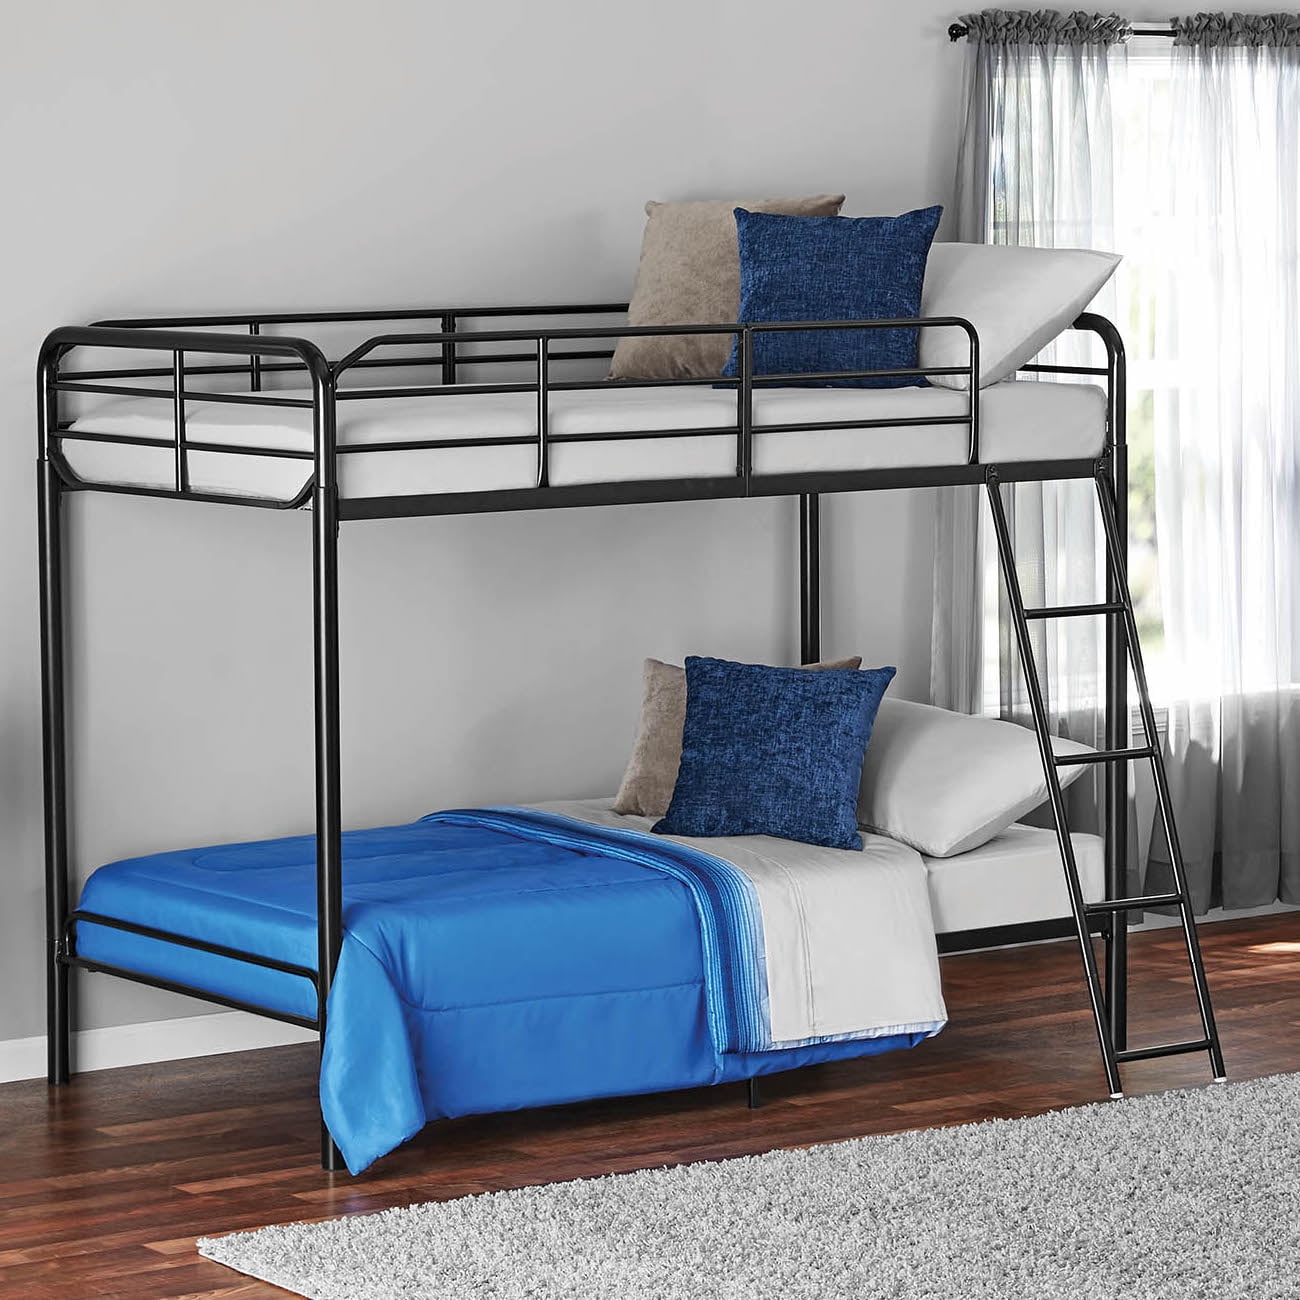 Mainstays Twin Over Metal Bunk Bed, Metal Bunk Bed Replacement Rails